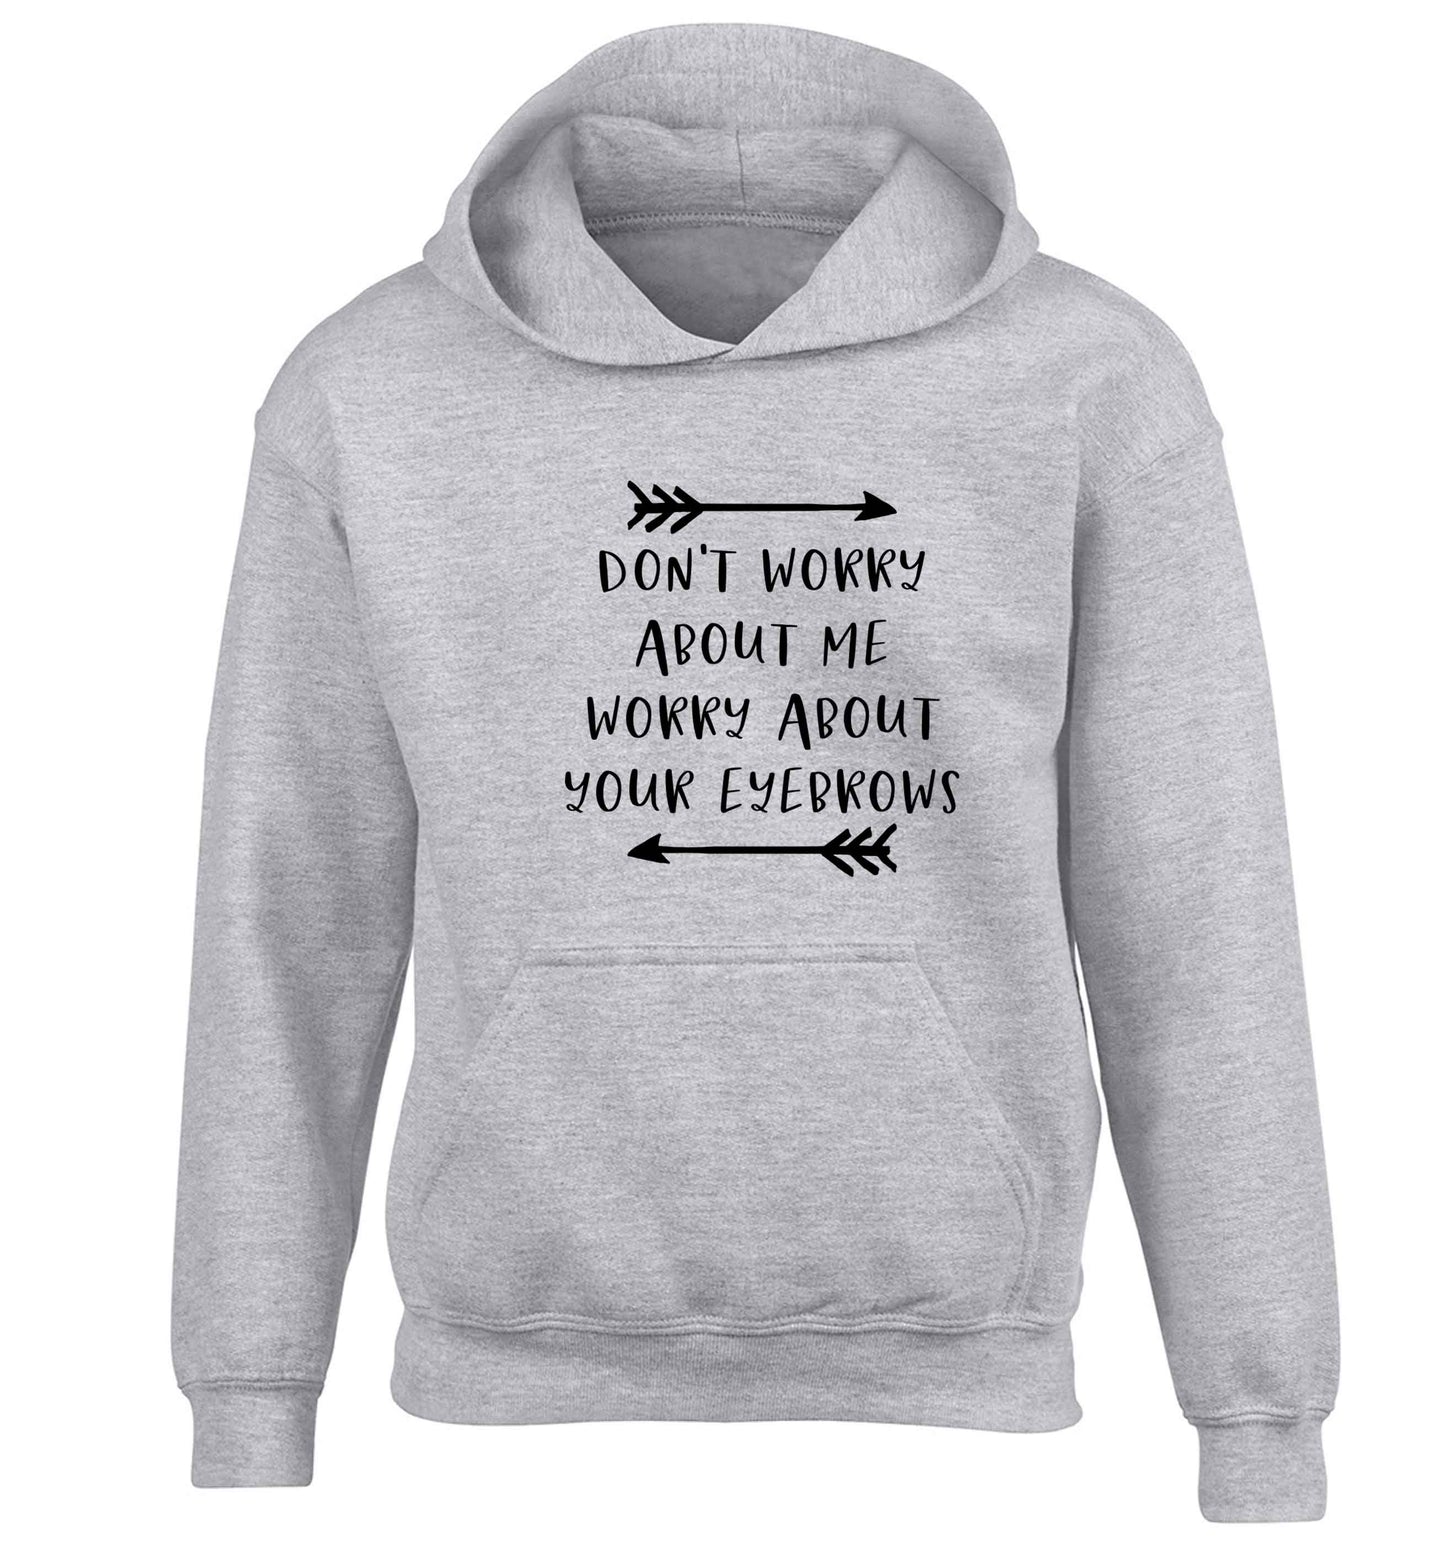 Don't worry about me worry about your eyebrows children's grey hoodie 12-13 Years